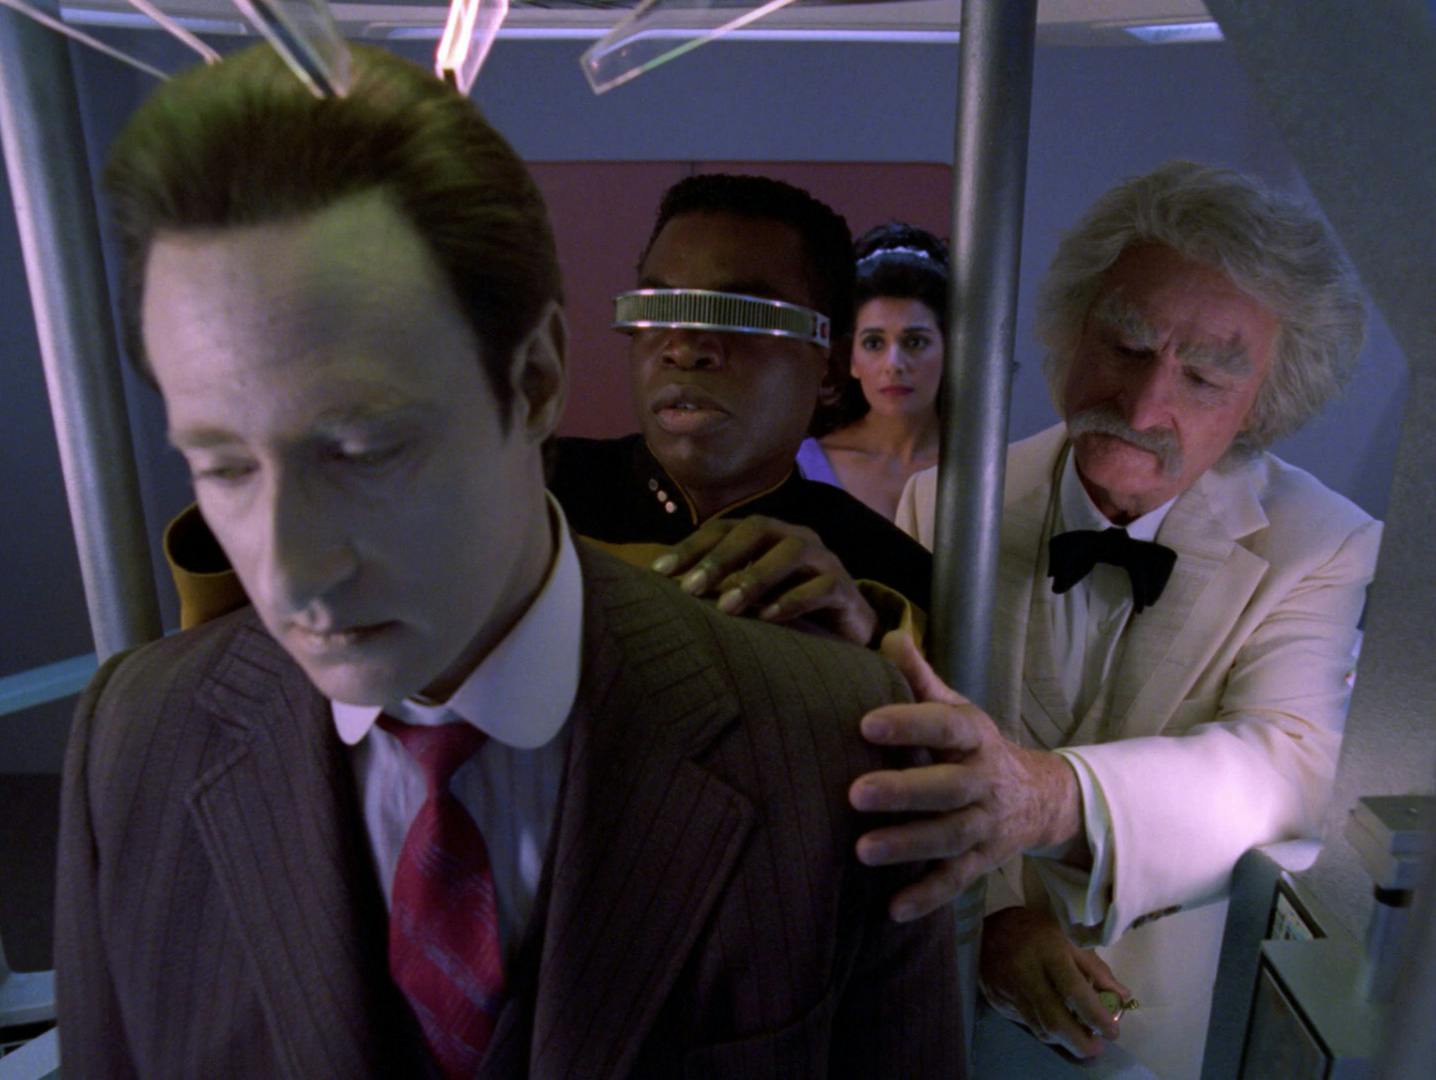 In the science lab, as Geordi works to reactivate Data, Samuel Clemens aka Mark Twain reaches out and touches Data's shoulder and apologizes for misjudging him in 'Time's Arrow, Part II'